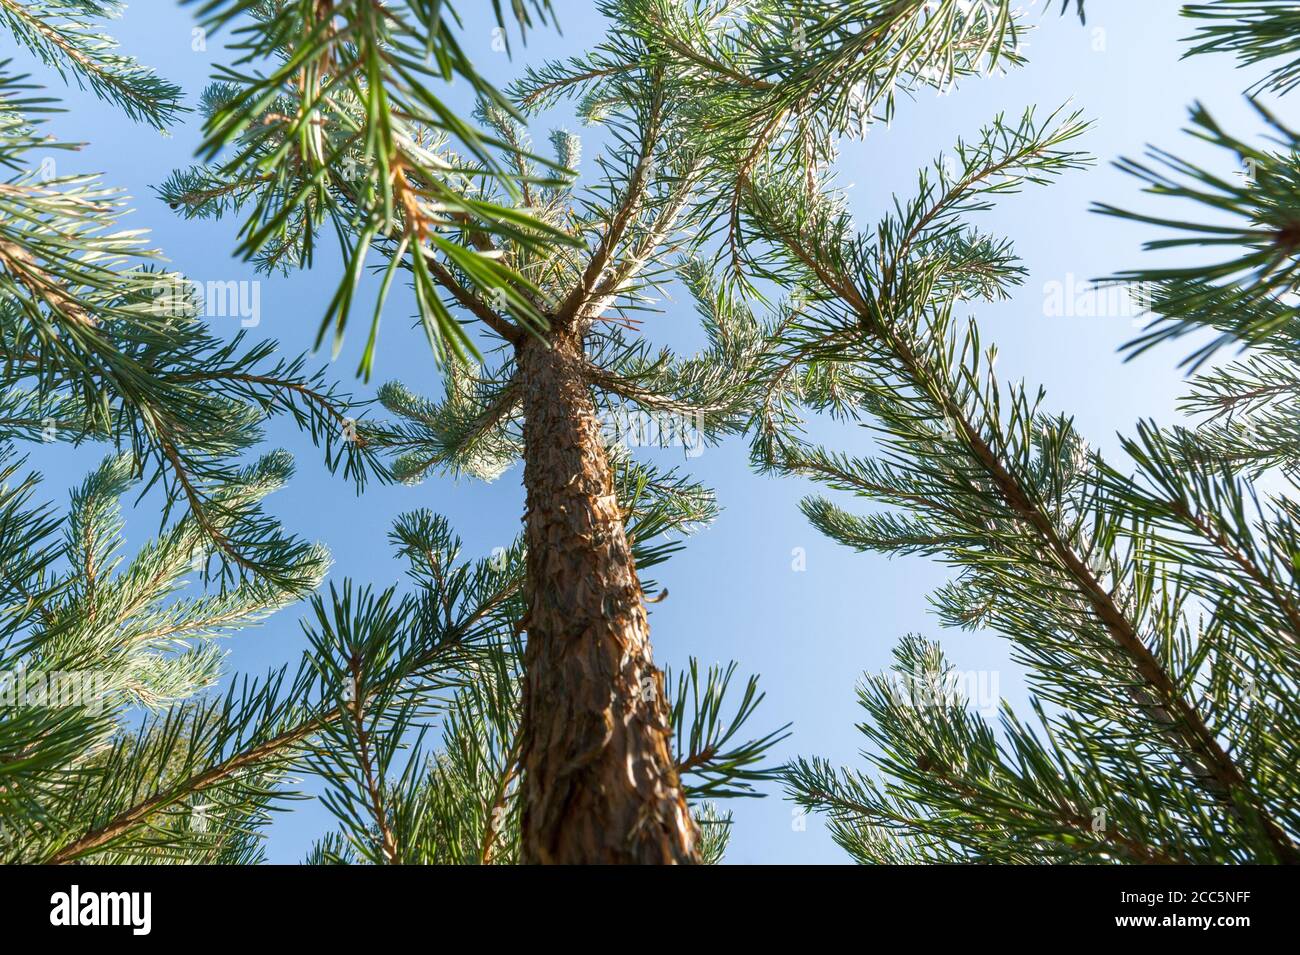 young sapling pine trees against a bright blue sky Stock Photo